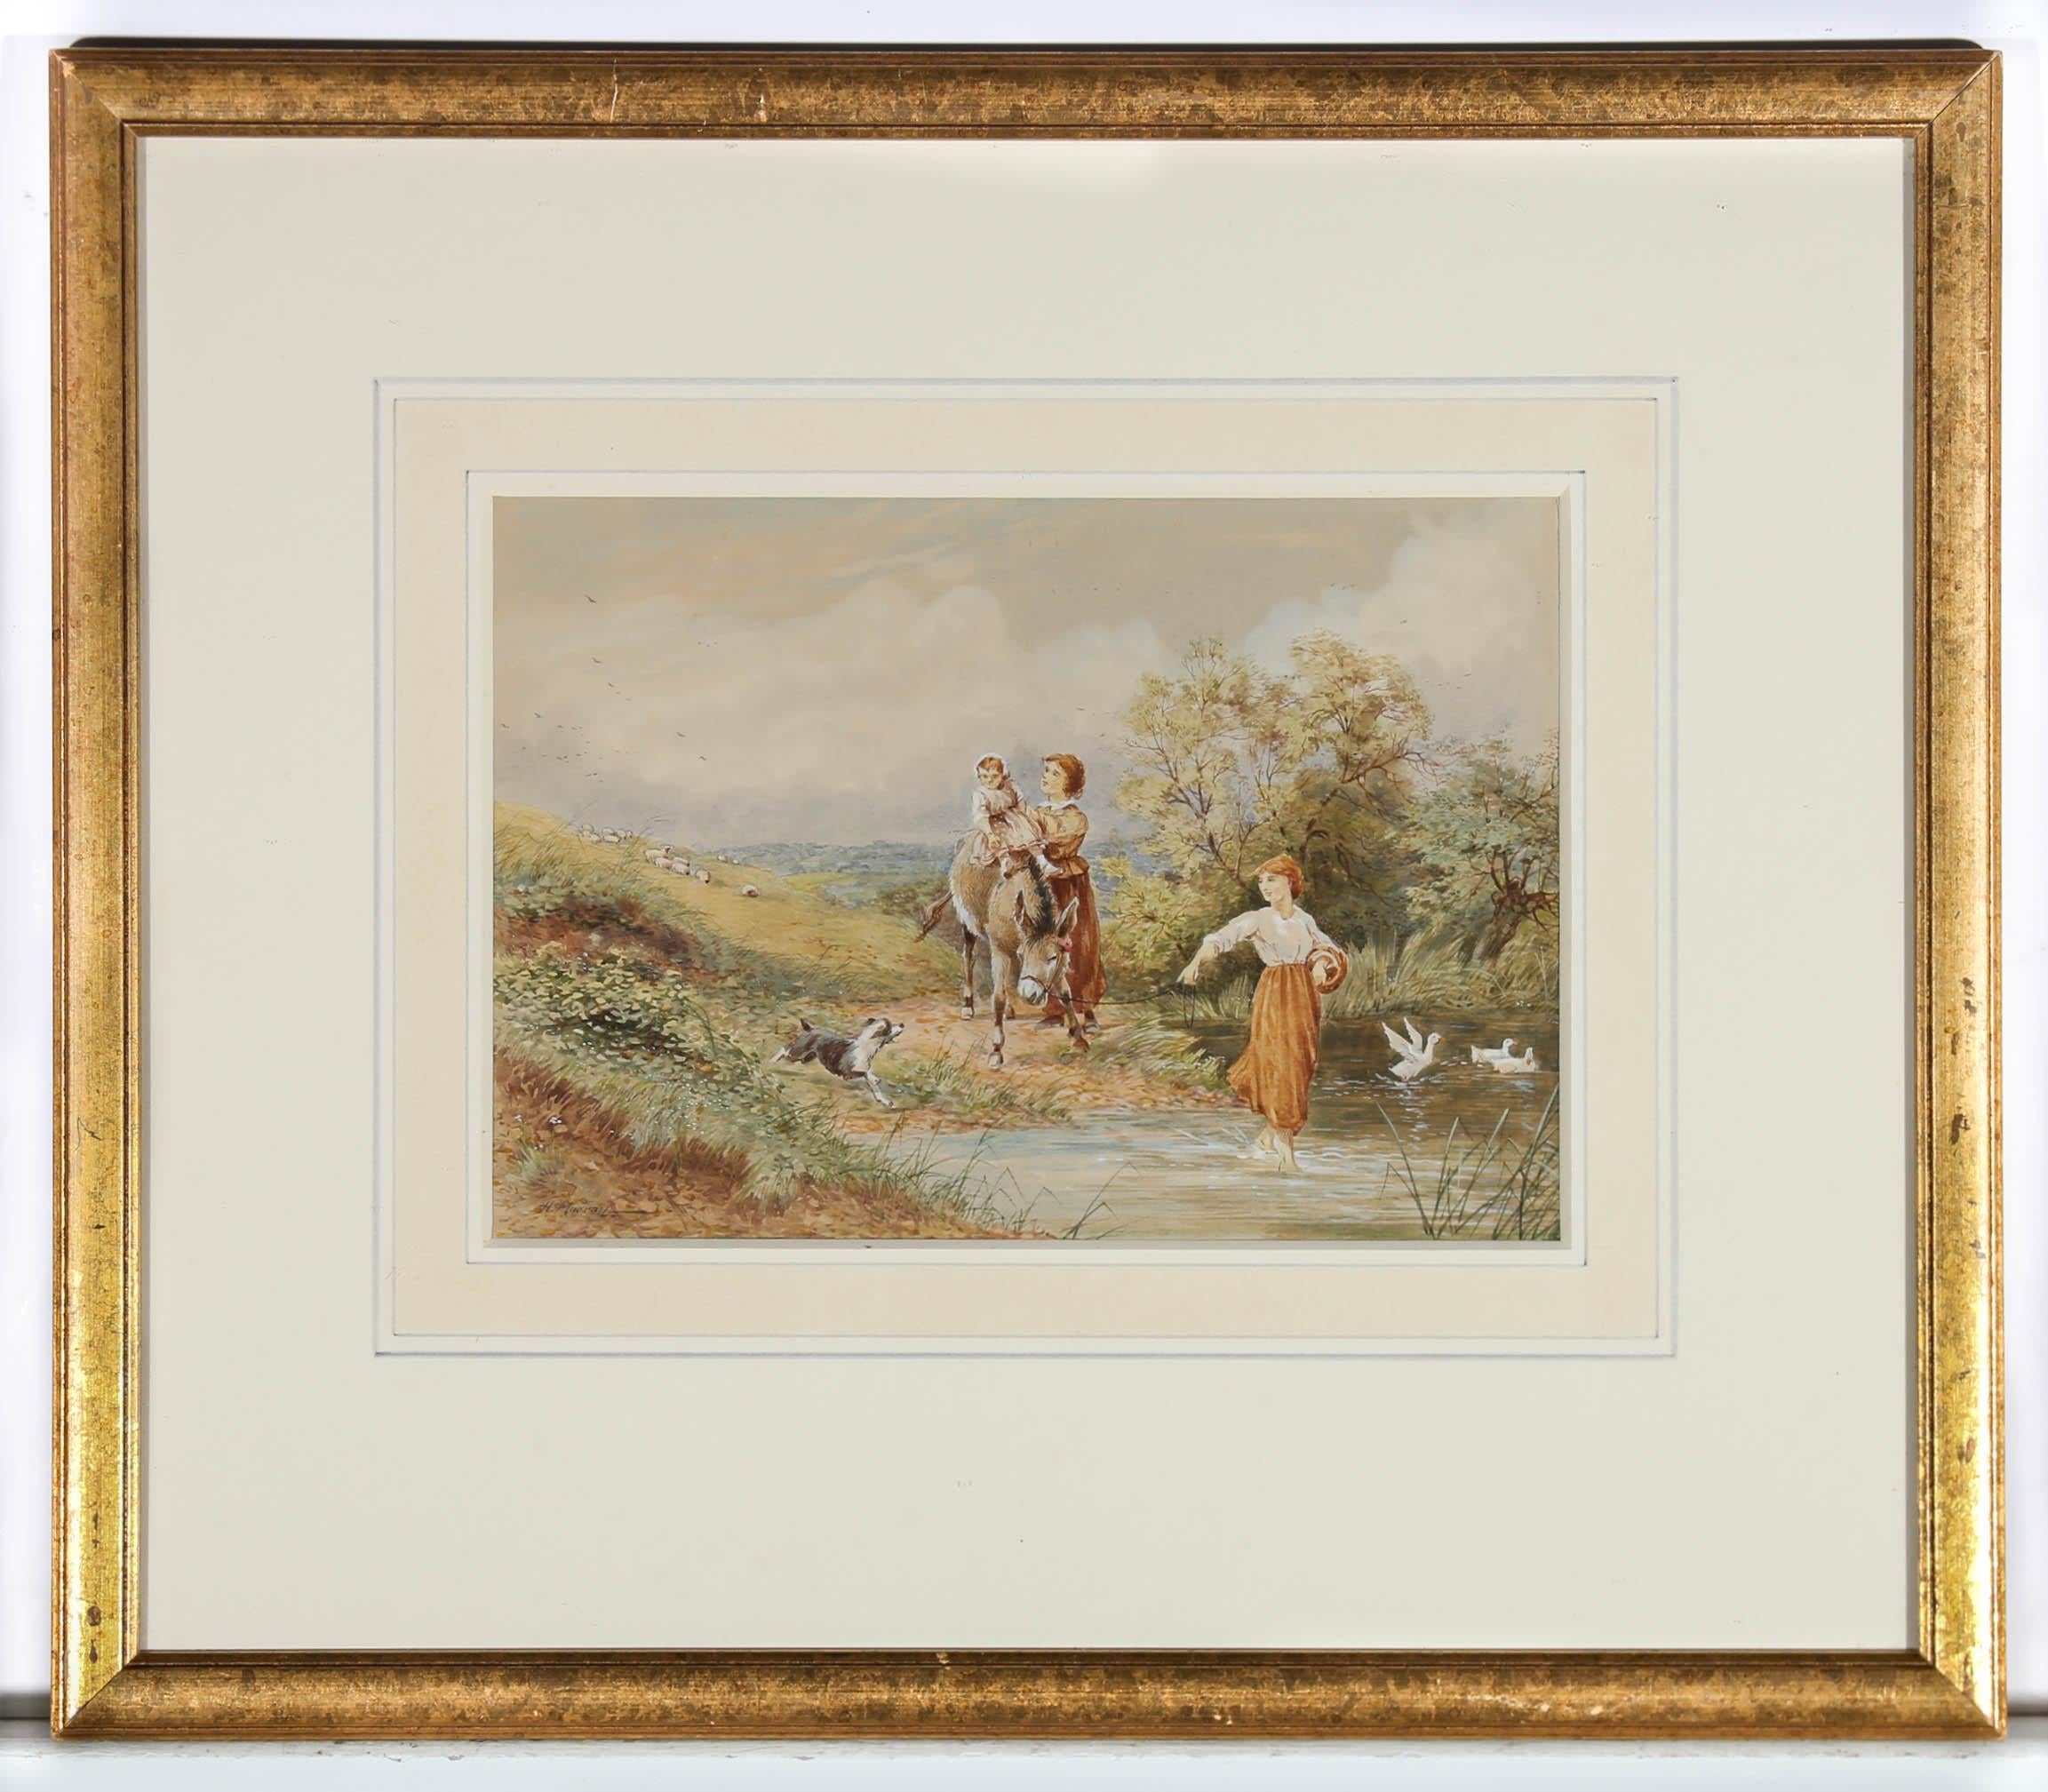 A charming early 20th Century watercolour depicting two figures propping a young child up on a donkey who reluctantly heads into the stream. Painted in fine detail. Heightened with areas of gouache. Signed to the lower left. Presented in a glazed